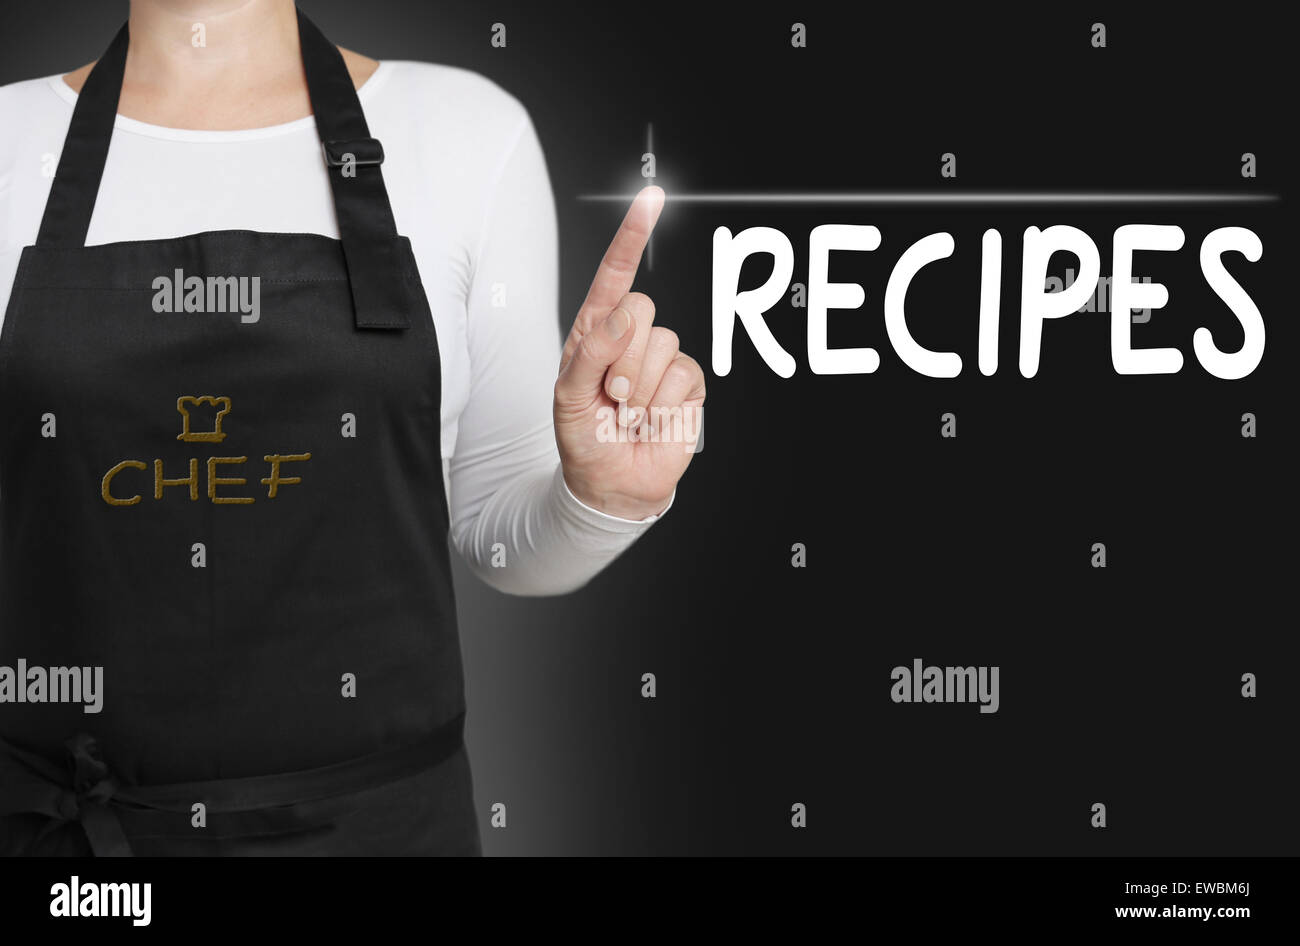 Recipes touchscreen is operated by chef. Stock Photo